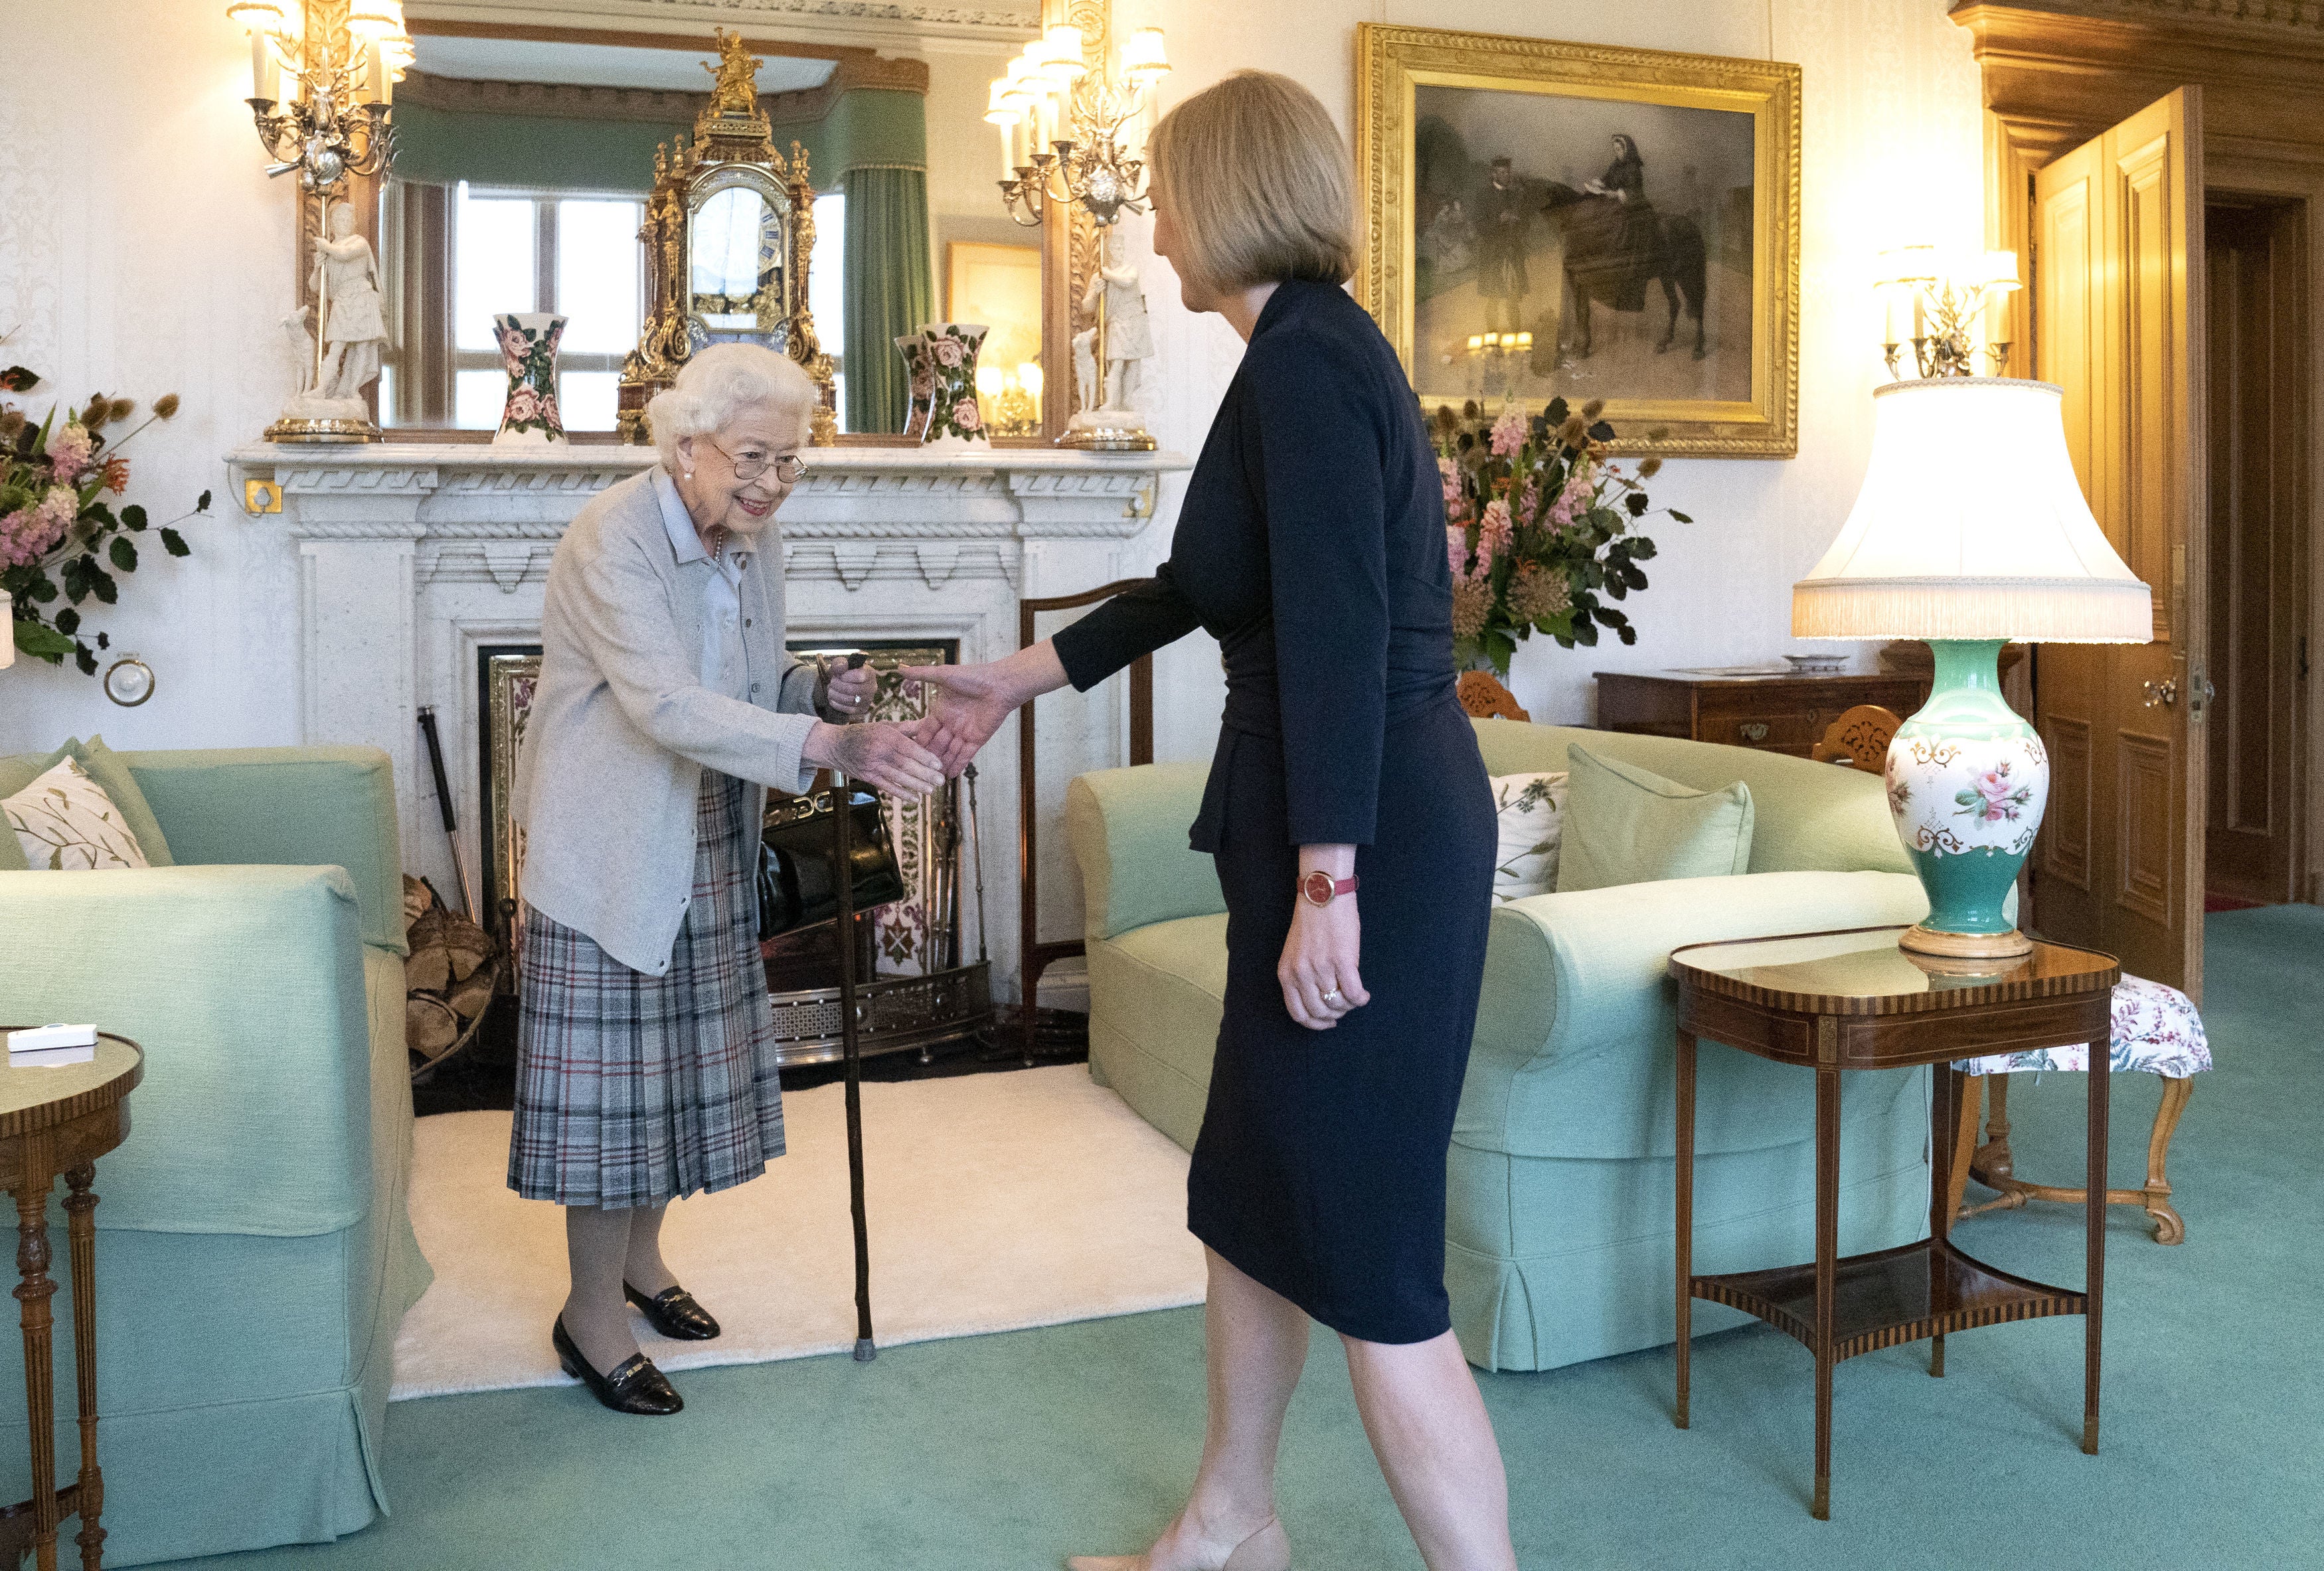 The Queen welcomed Liz Truss during the audience at Balmoral on Tuesday